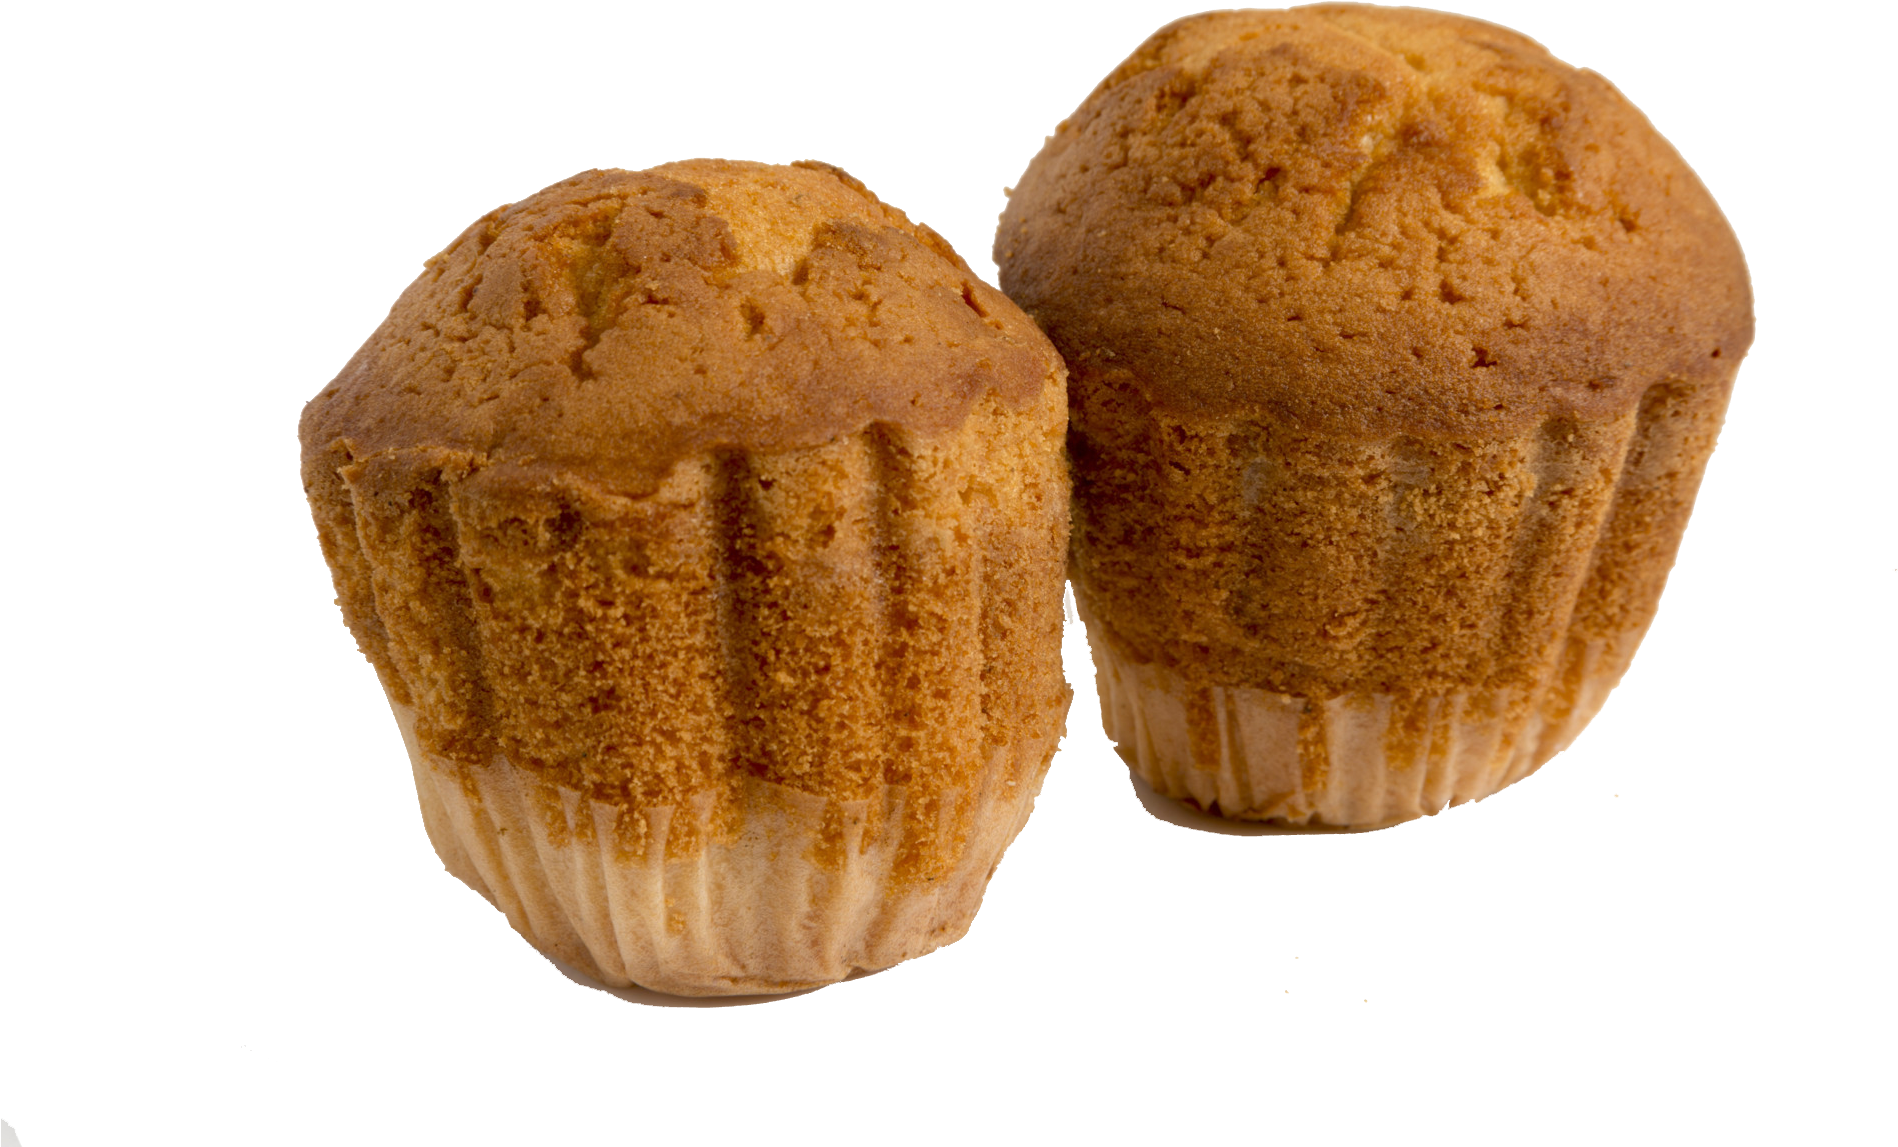 Two Muffins On A Black Background